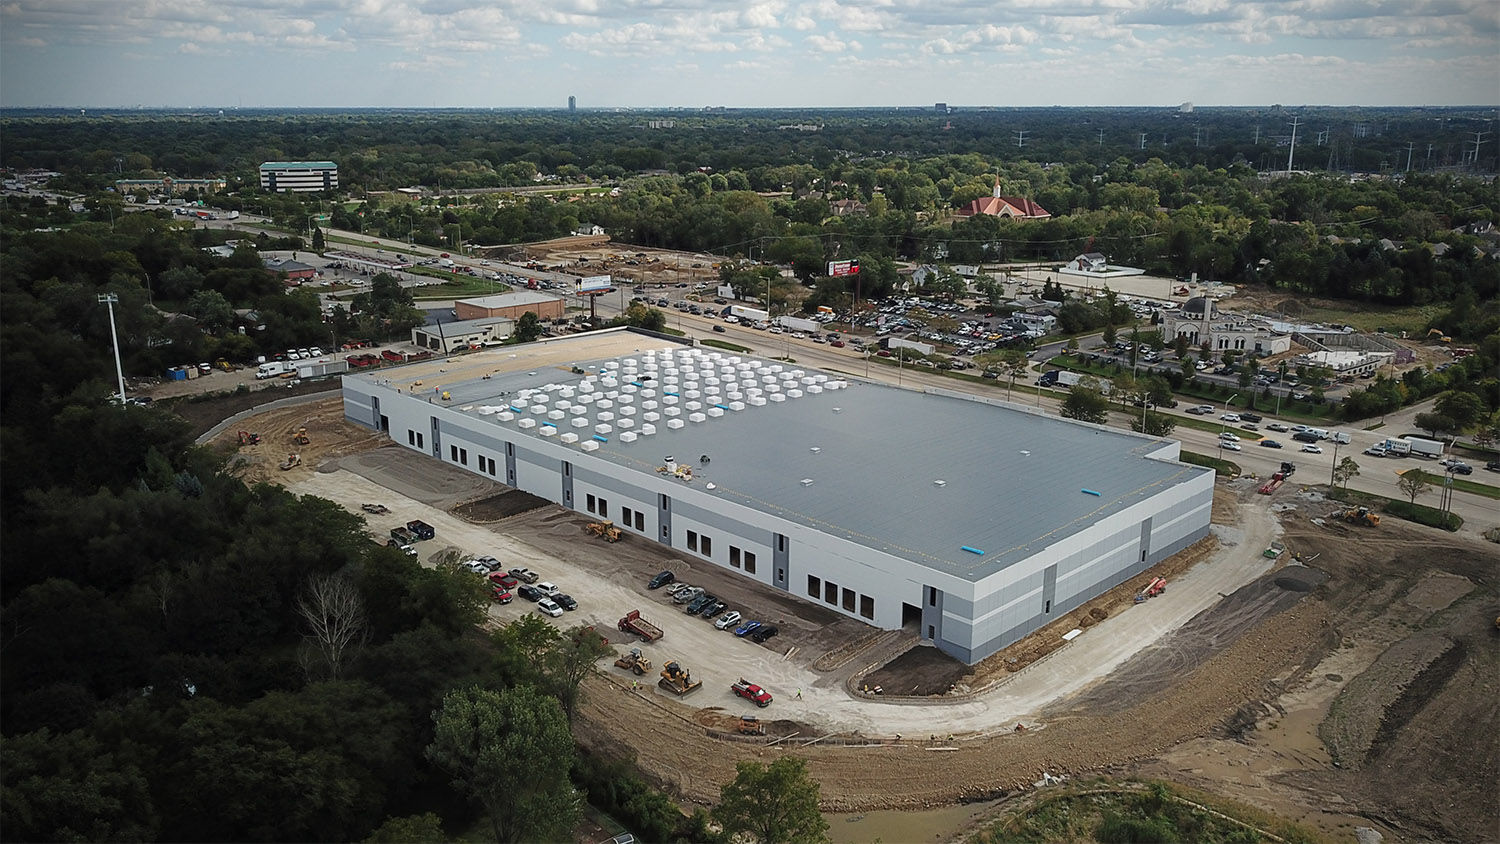 Watch the Transformation: Duke Realty’s Newest Industrial Development Takes Shape